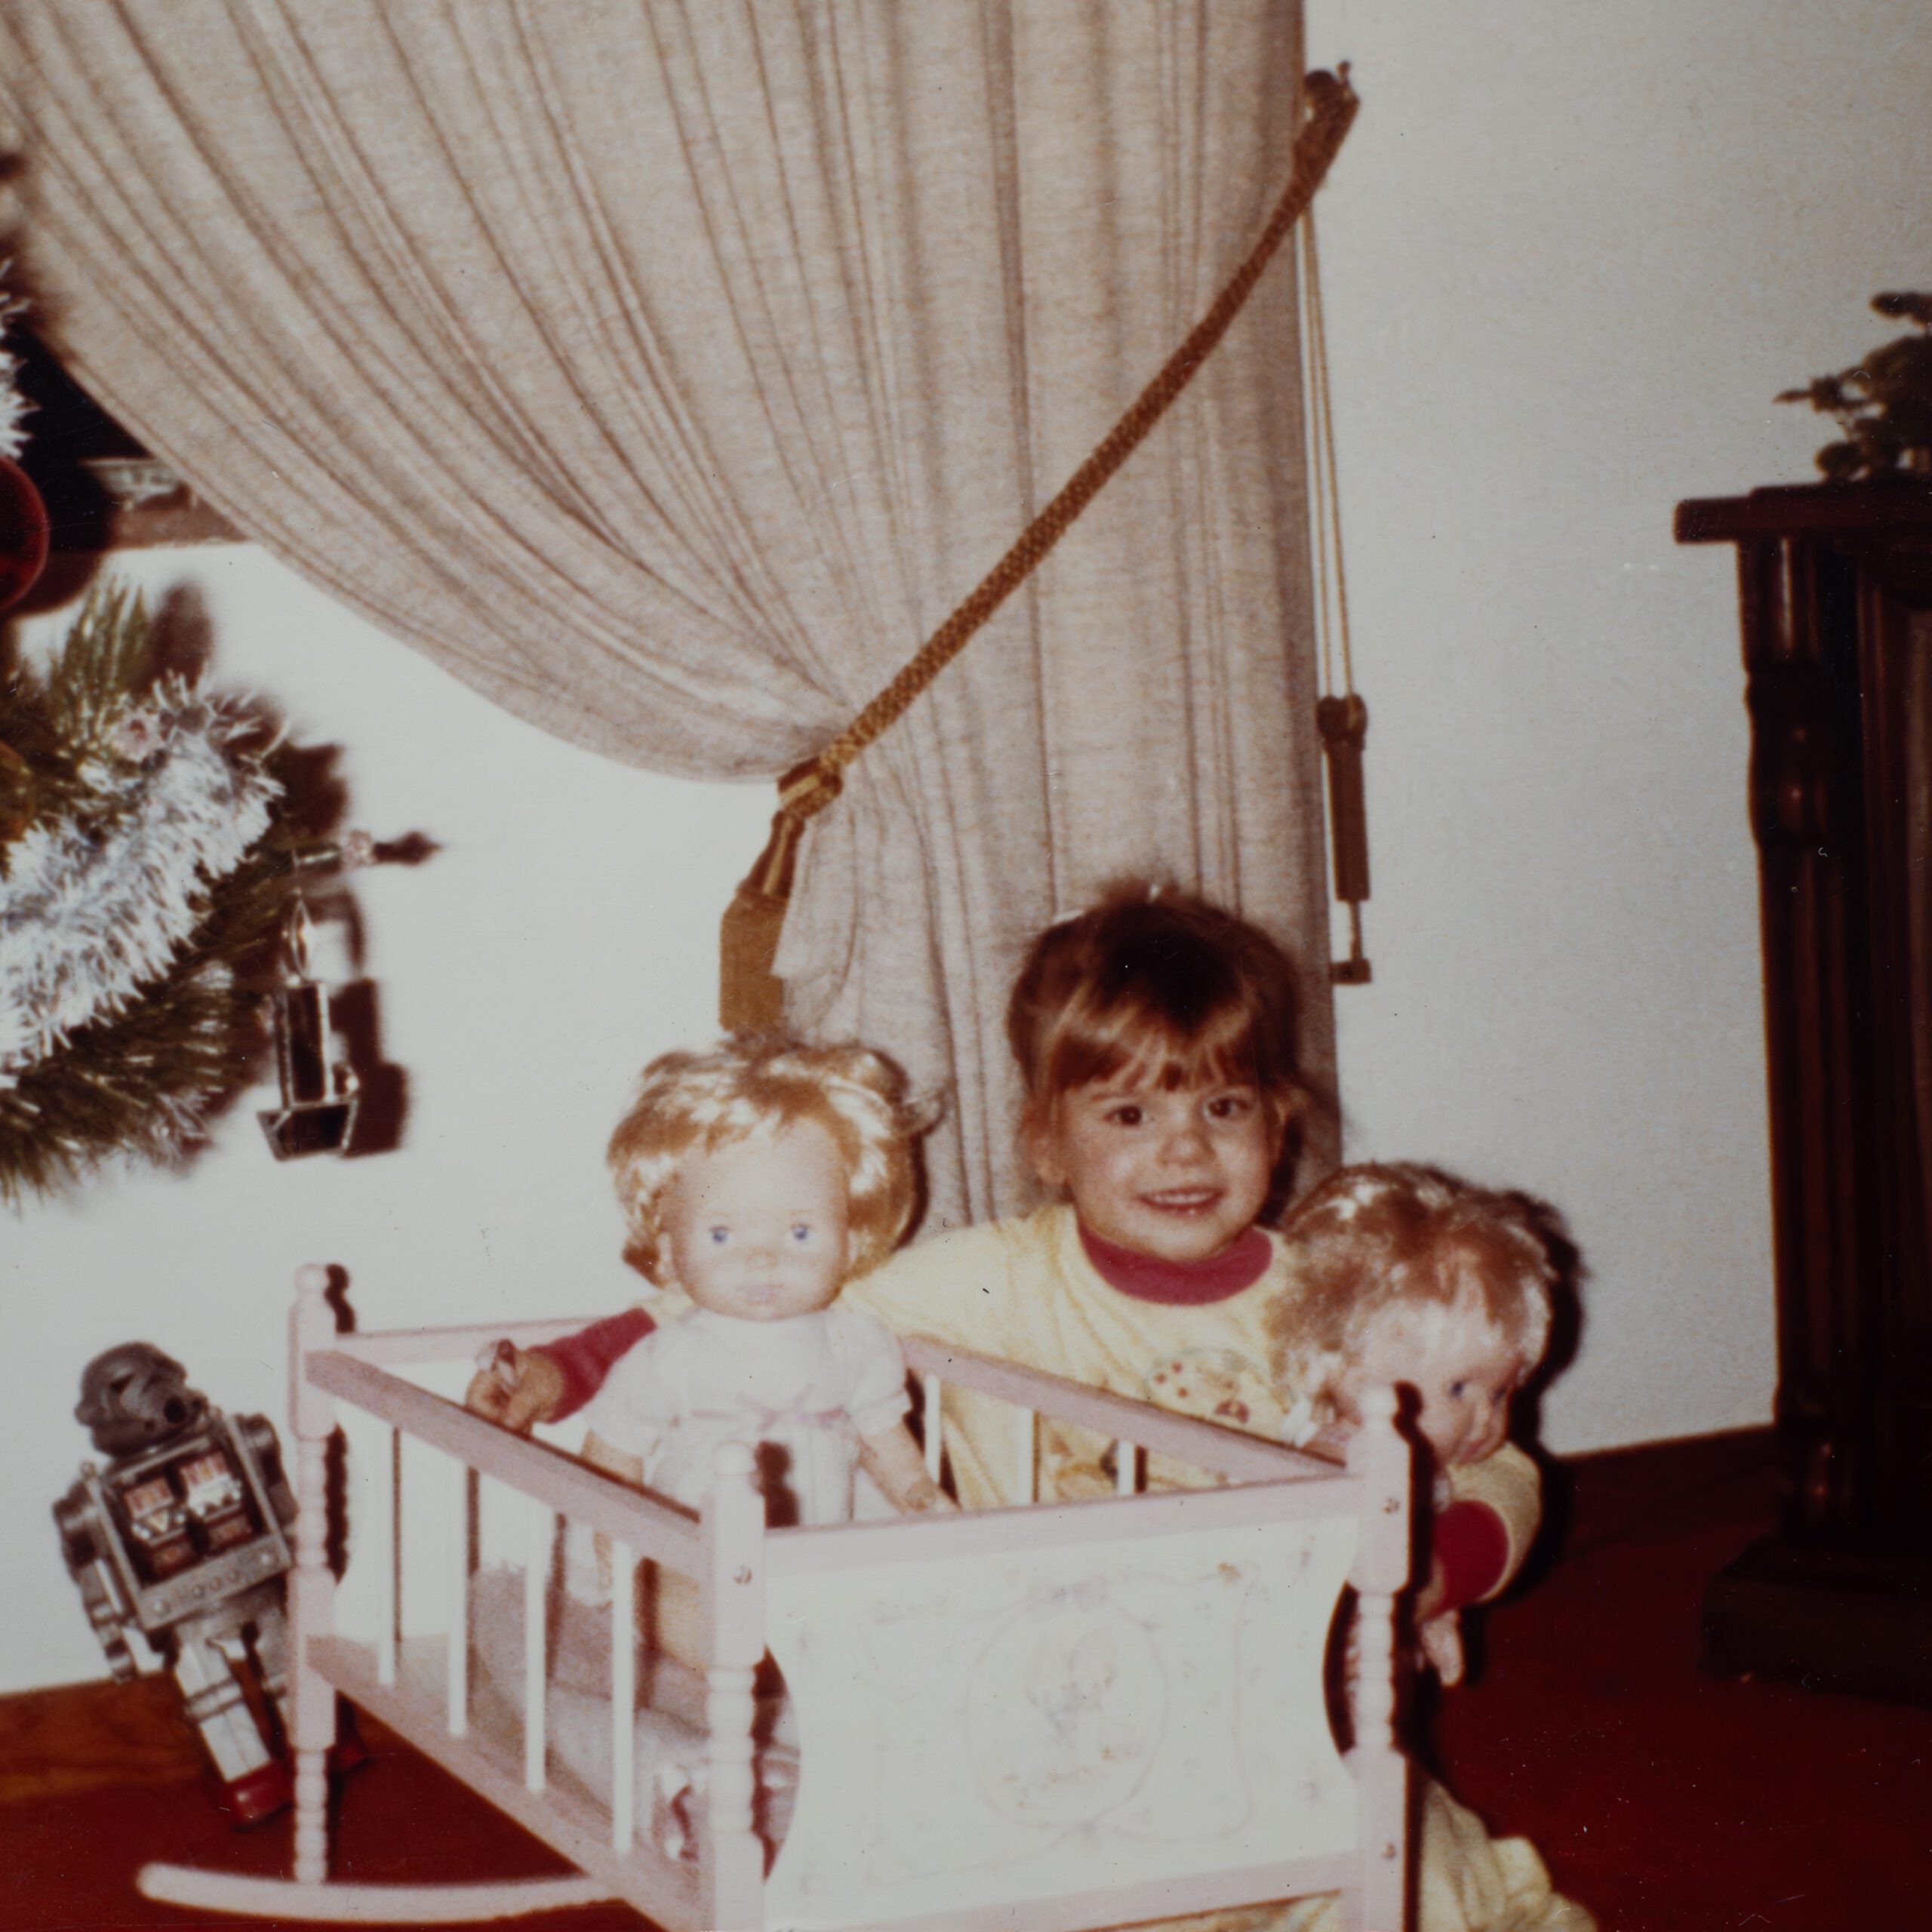 Young girl playing with dolls and a toy crib, with a decorated christmas tree in the background.